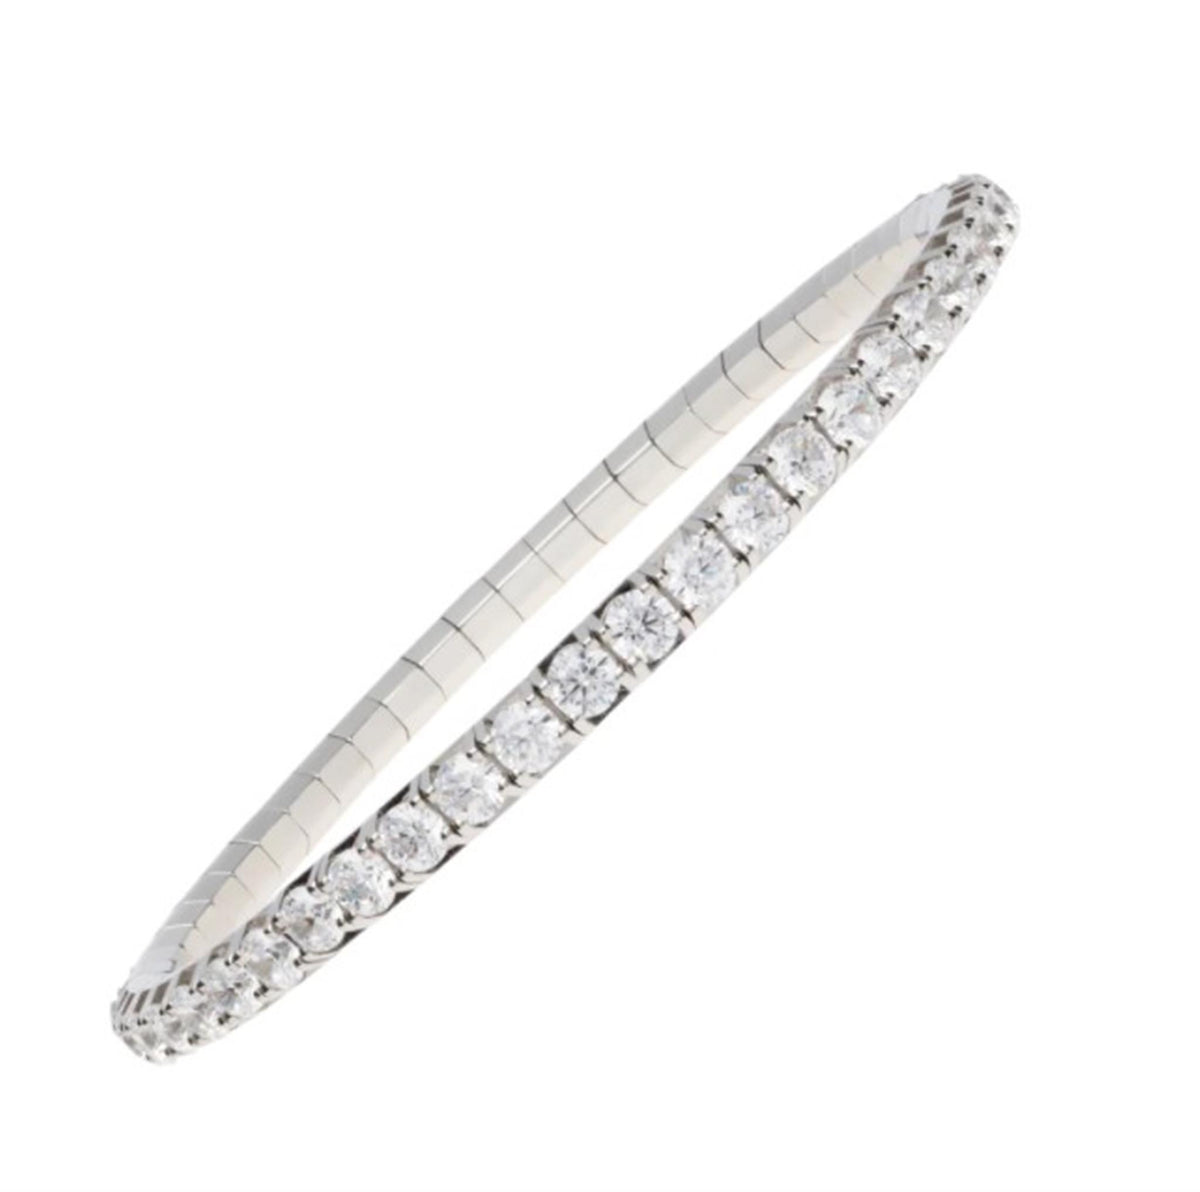 18K White Gold Extensible Bracelet with 5.50cttw Natural Diamonds